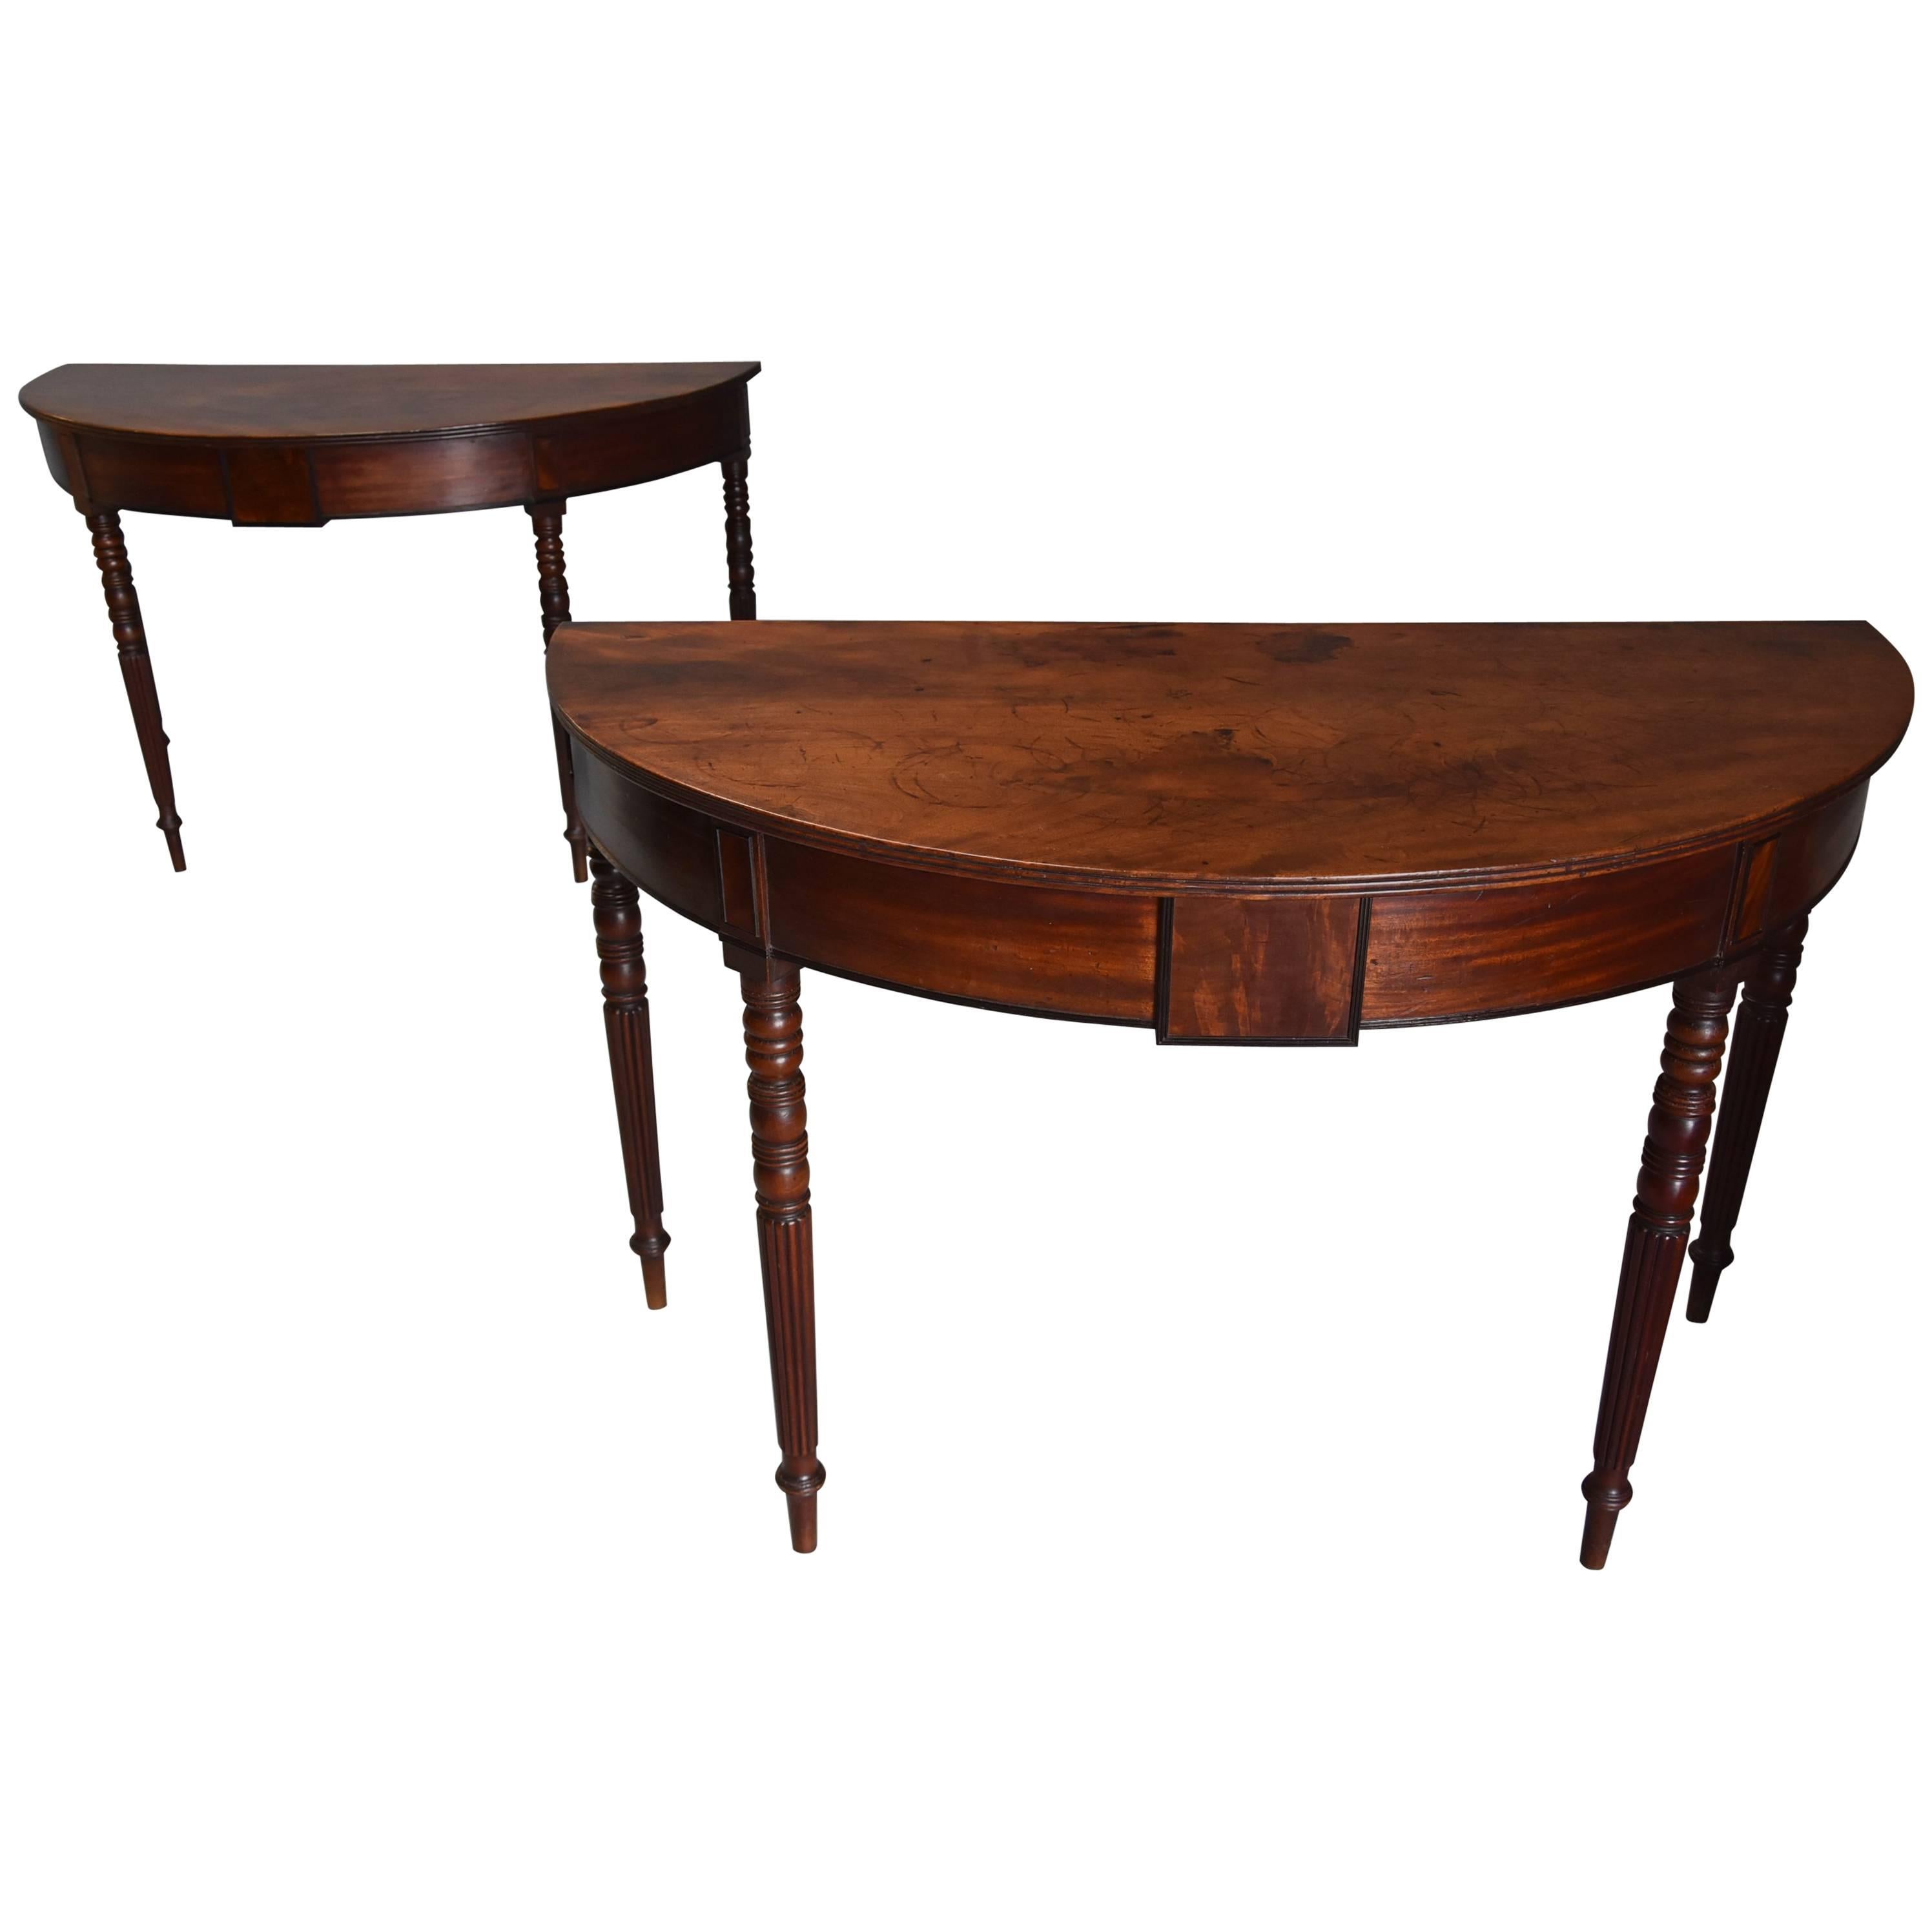 Pair of Good Quality Early 19th Century Mahogany Demilune Console Tables